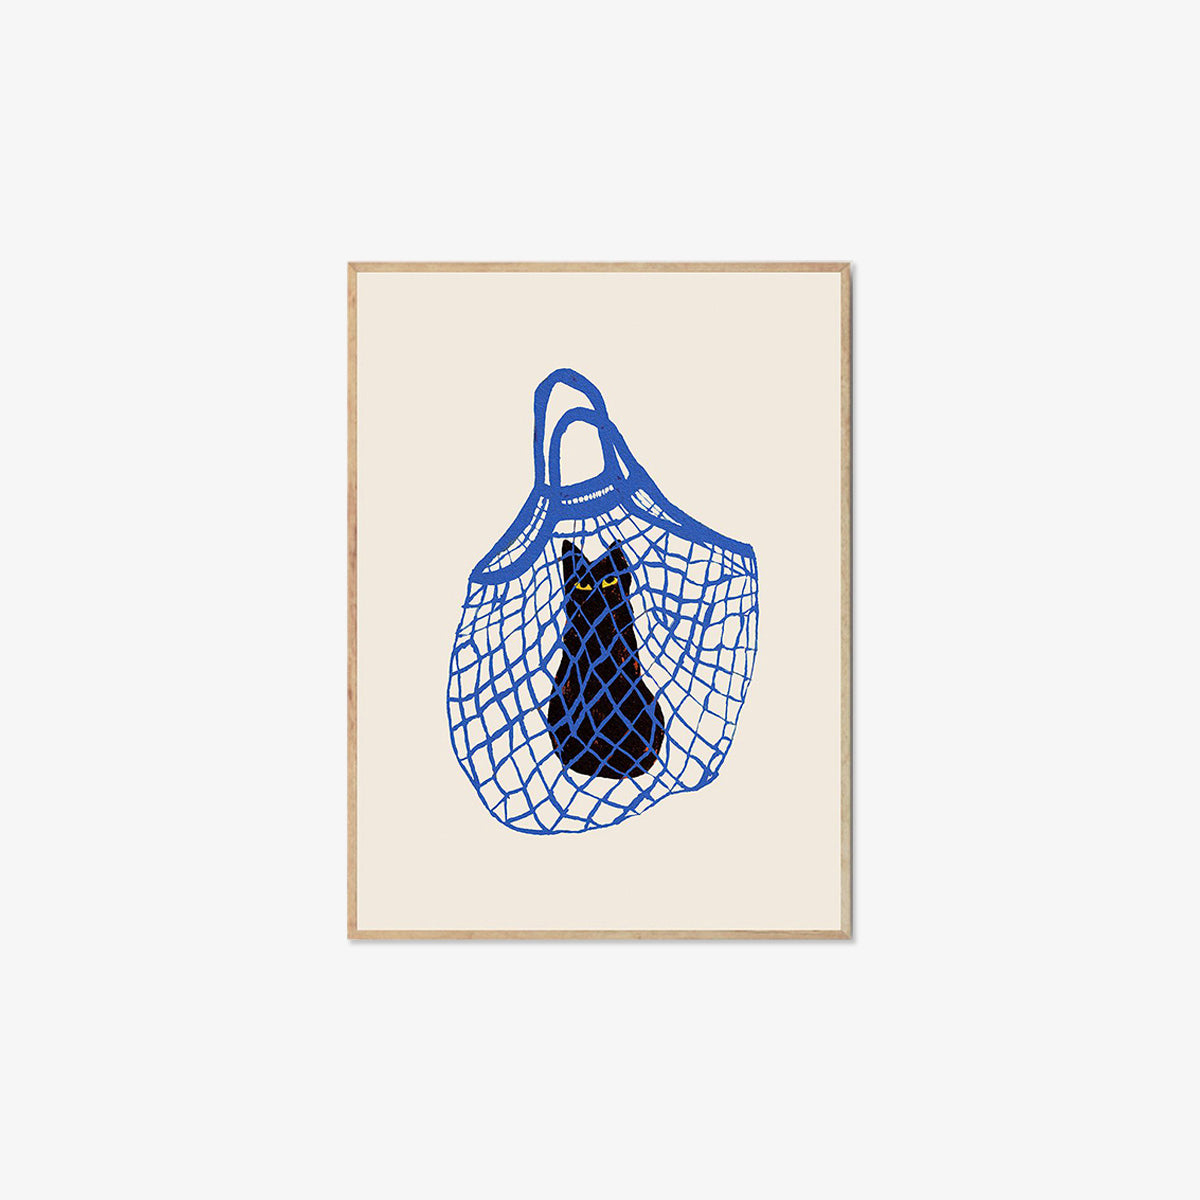 CARD A5 // THE CAT'S IN THE BAG